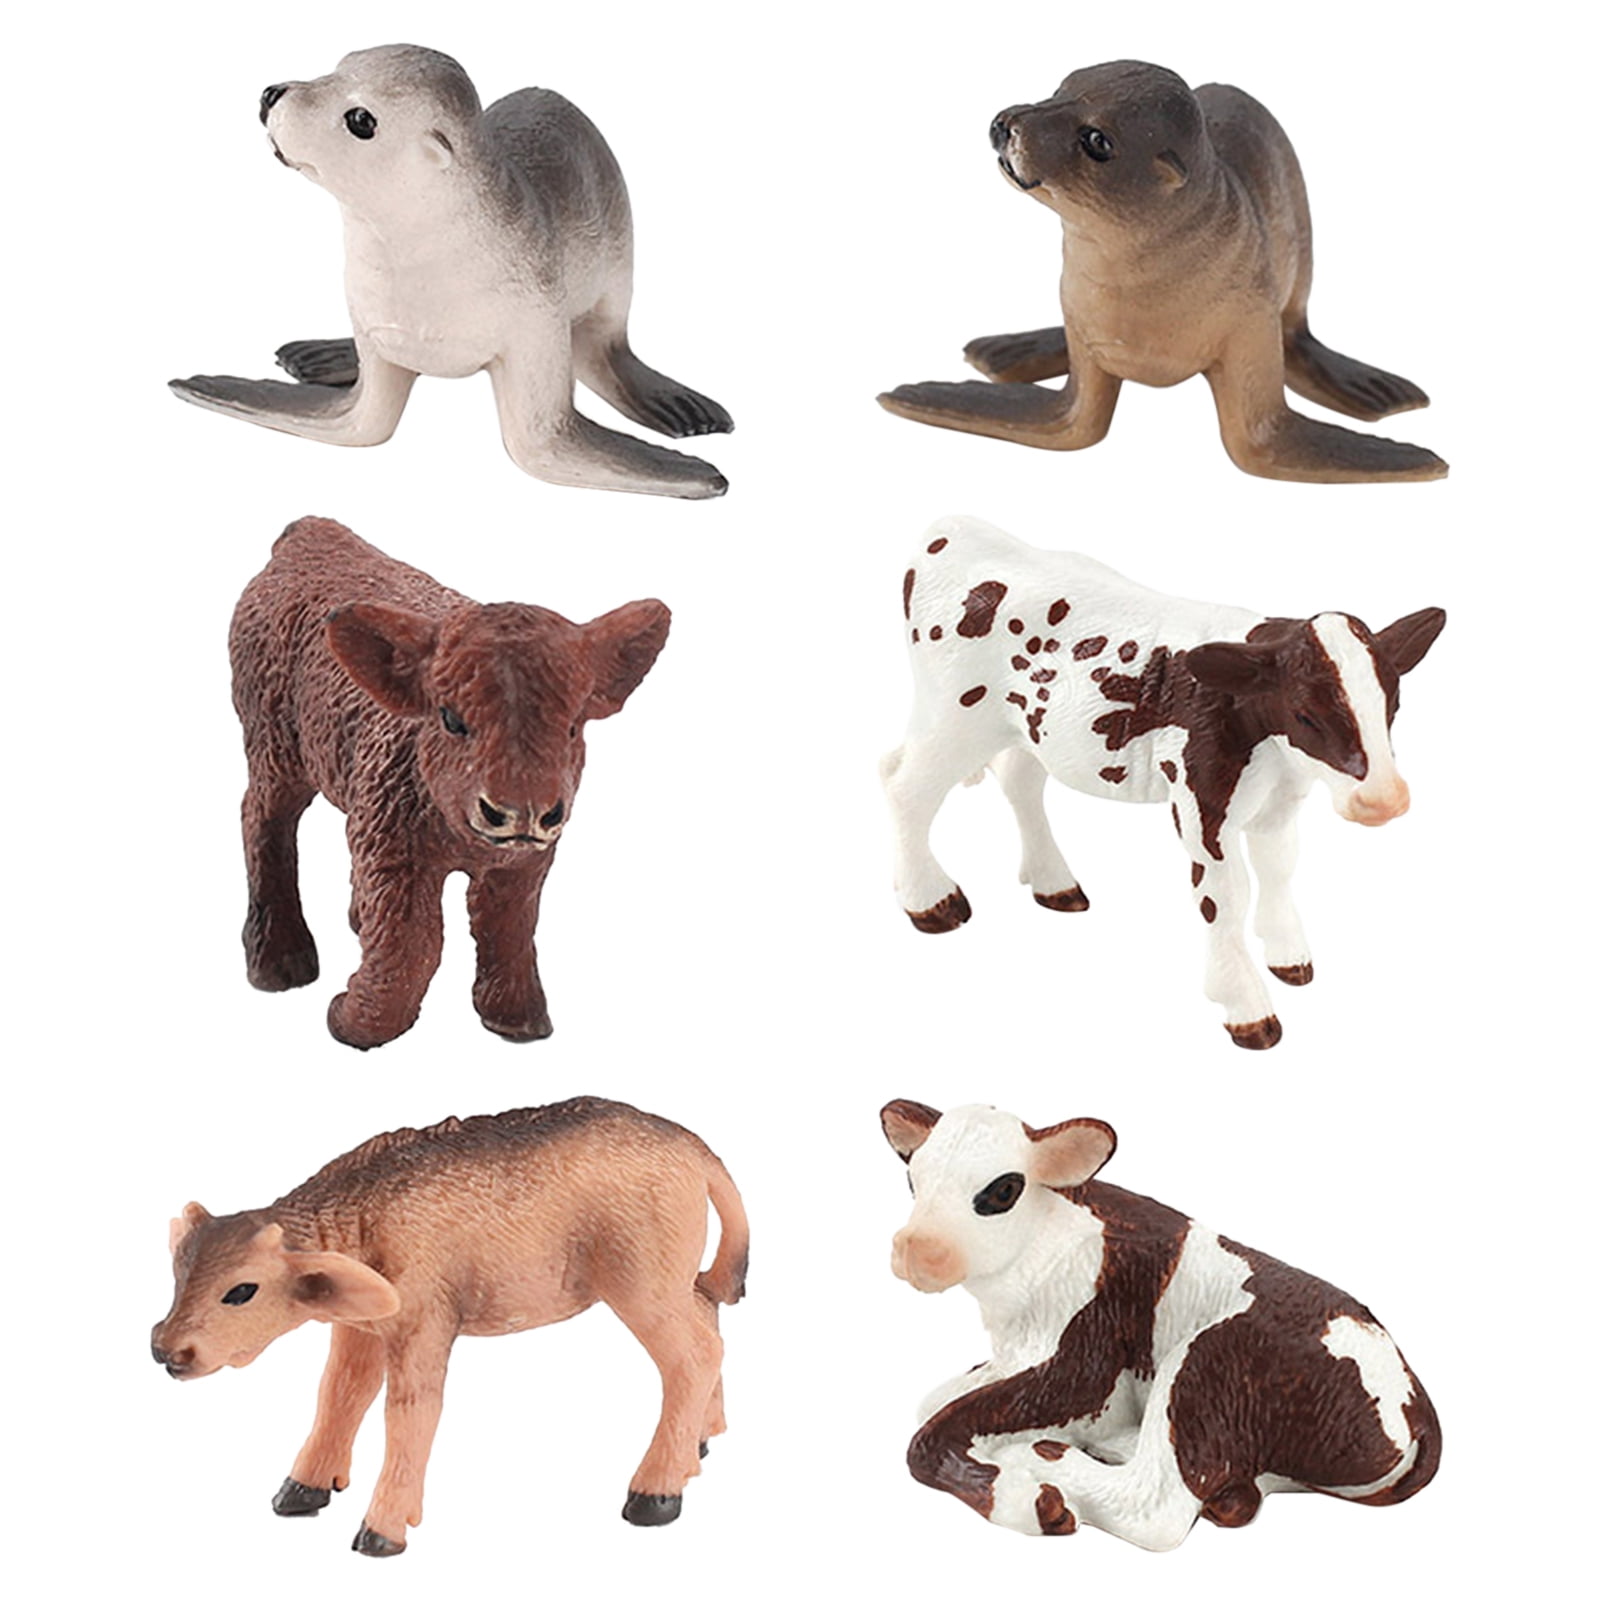 Details about   Safari Animals Figures Toys 20 Piece Realistic Plastic Jungle Zoo Playset 